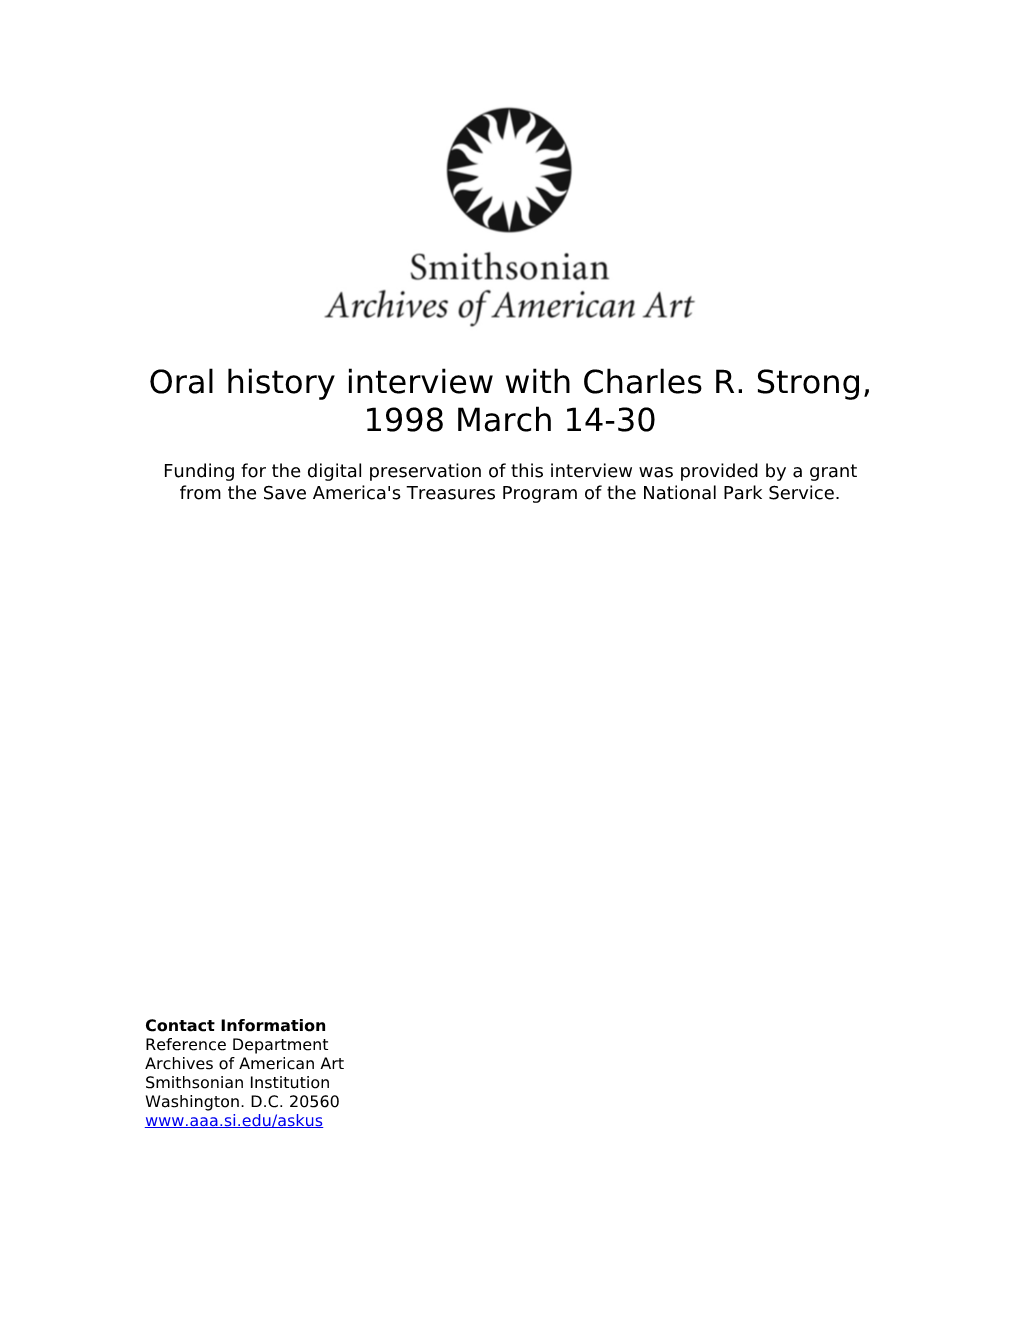 Oral History Interview with Charles R. Strong, 1998 March 14-30